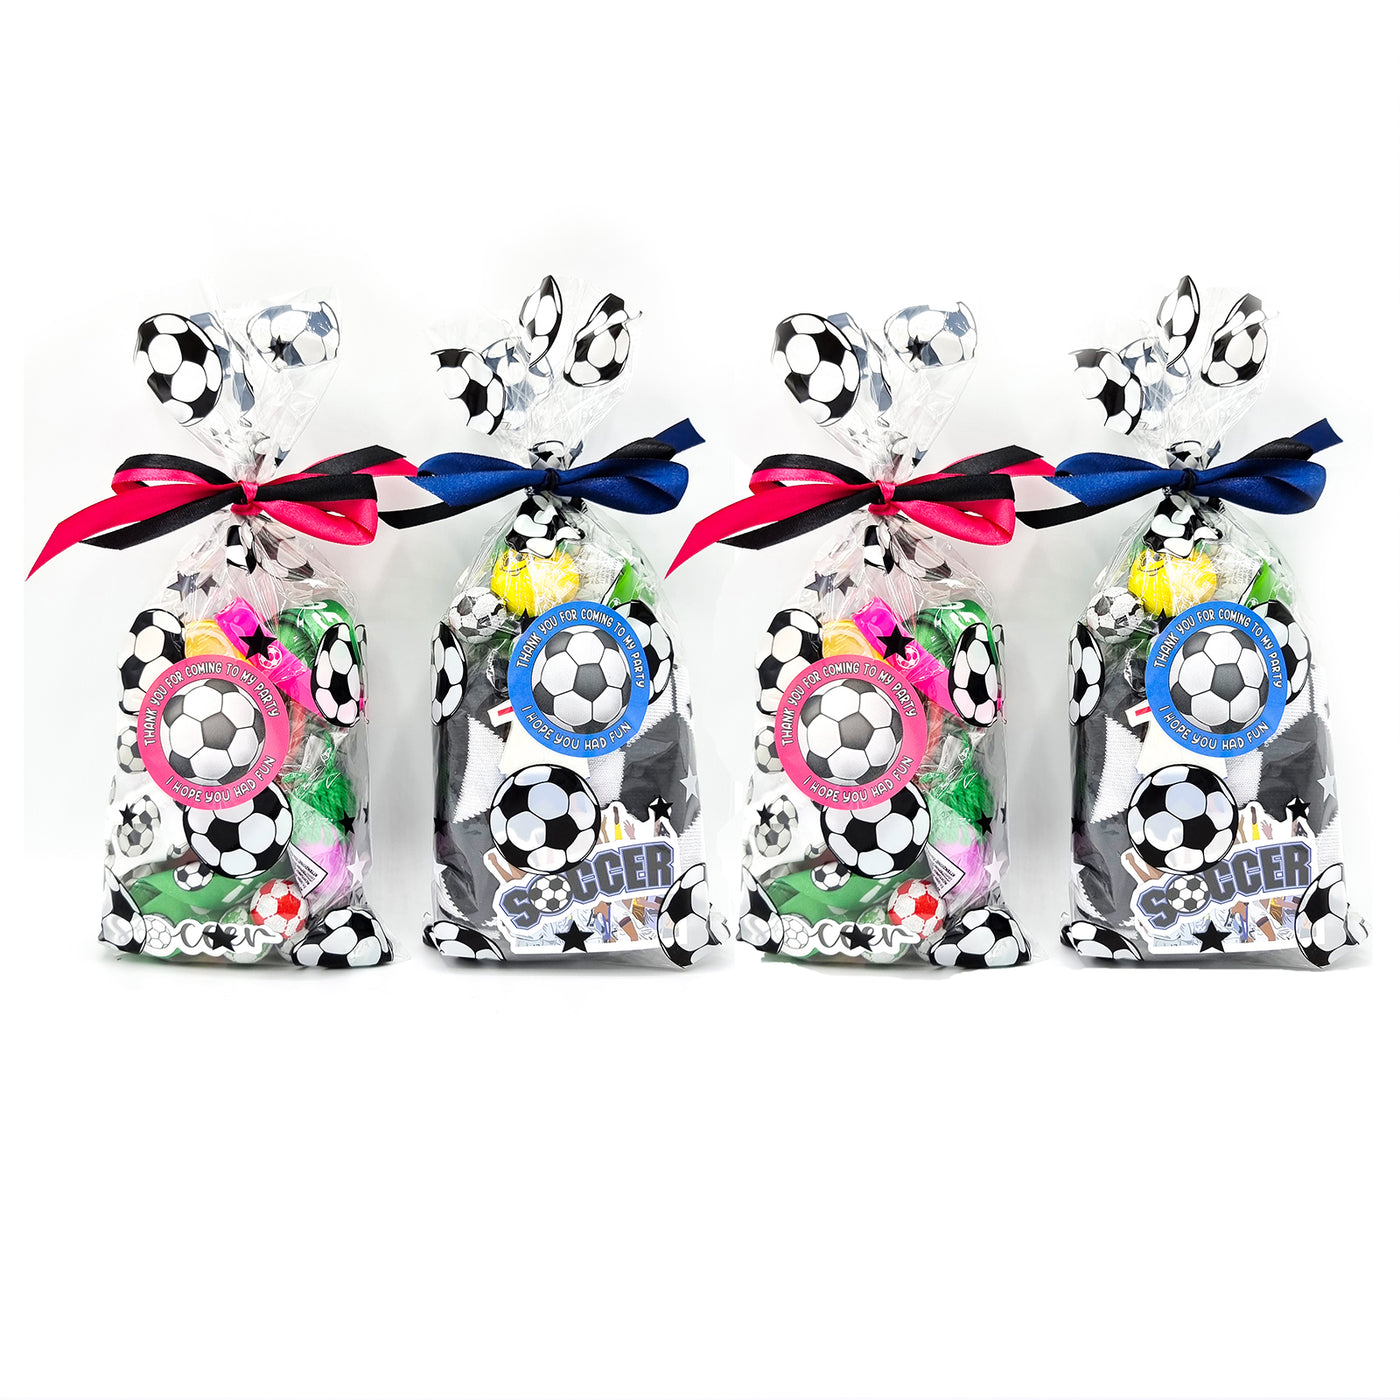 Pre-filled Children's Party Football Goody Bags With Sweets And Toys, Football Party Favours In Pink And Blue Colours. 